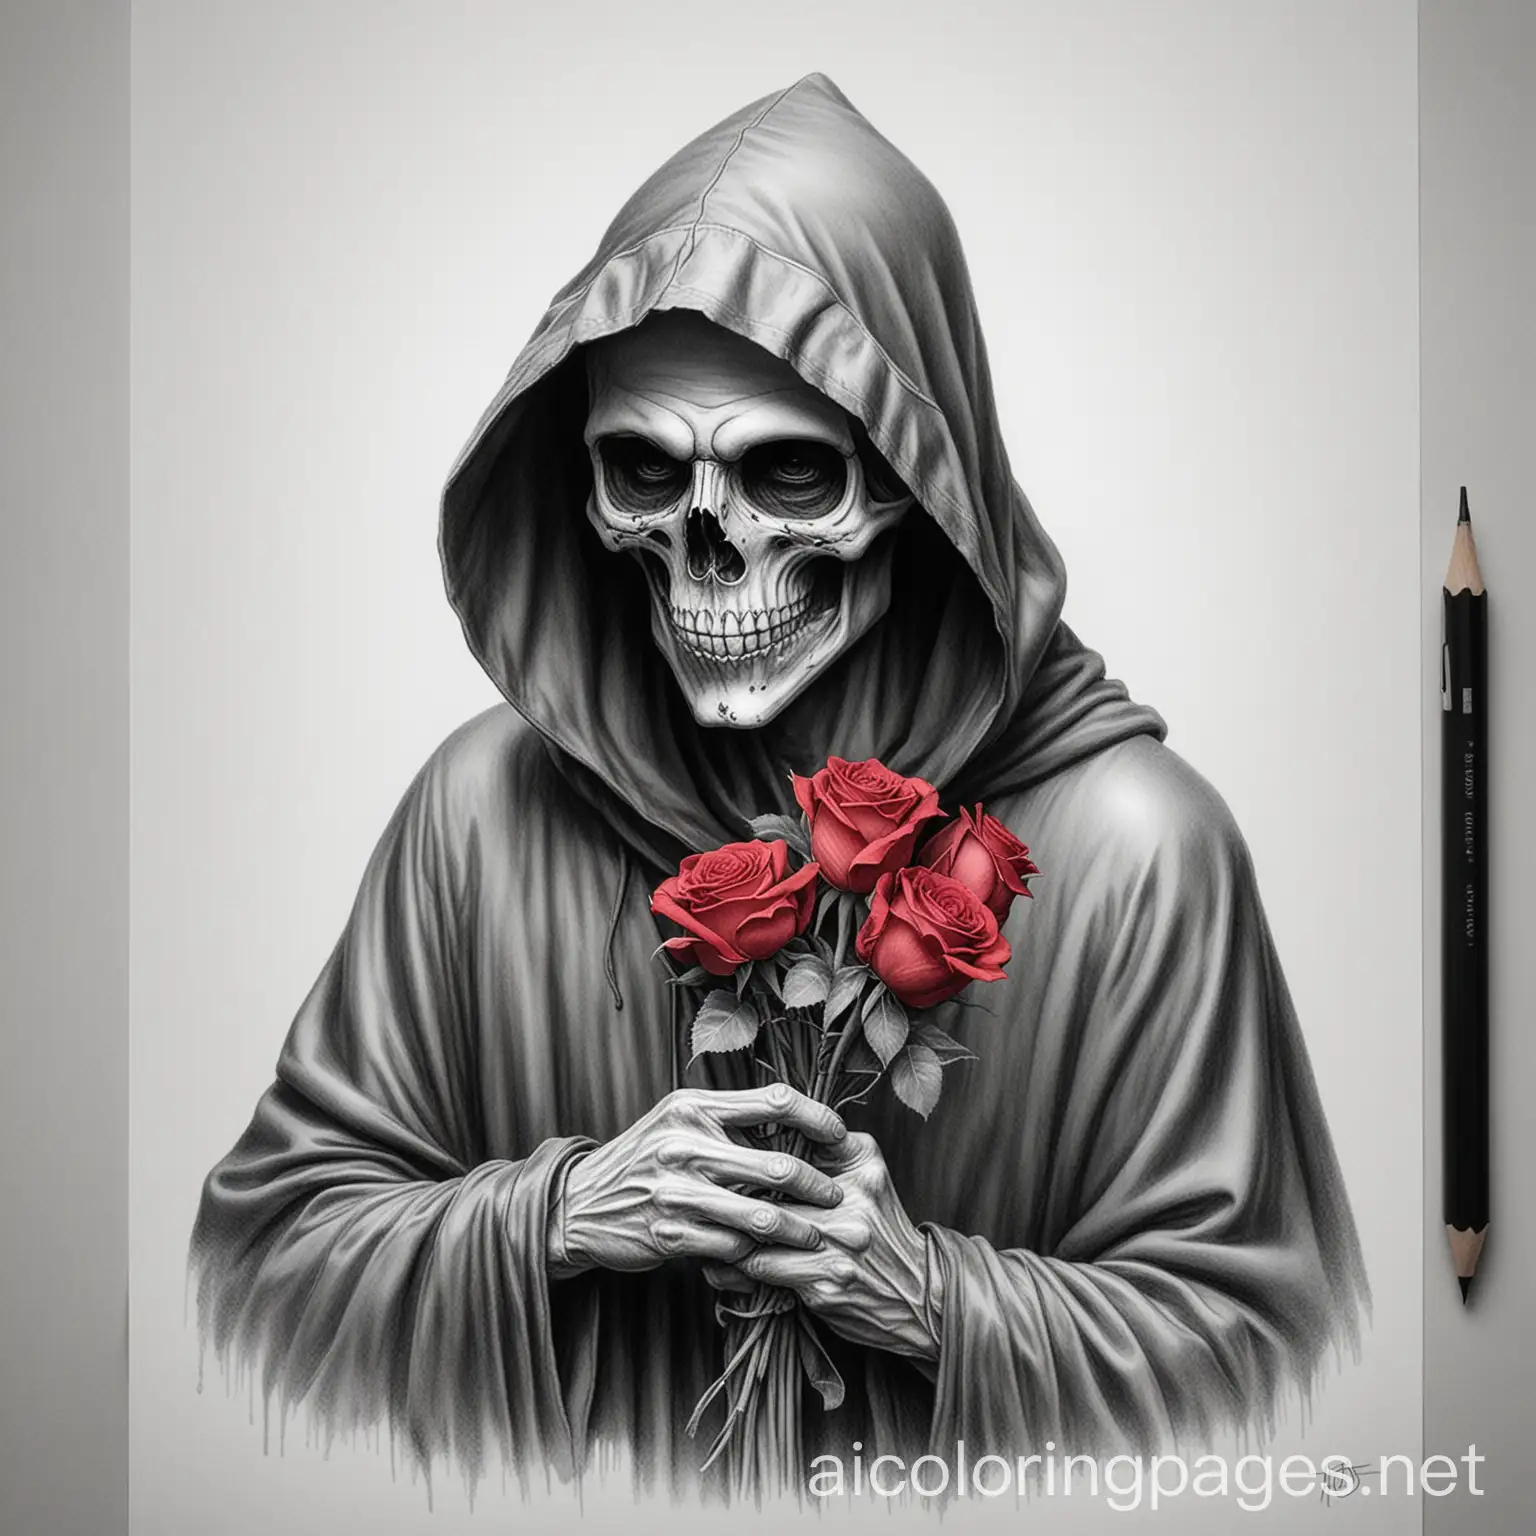 Hooded-Grim-Reaper-Contemplating-Roses-Realistic-Coloring-Page-Art